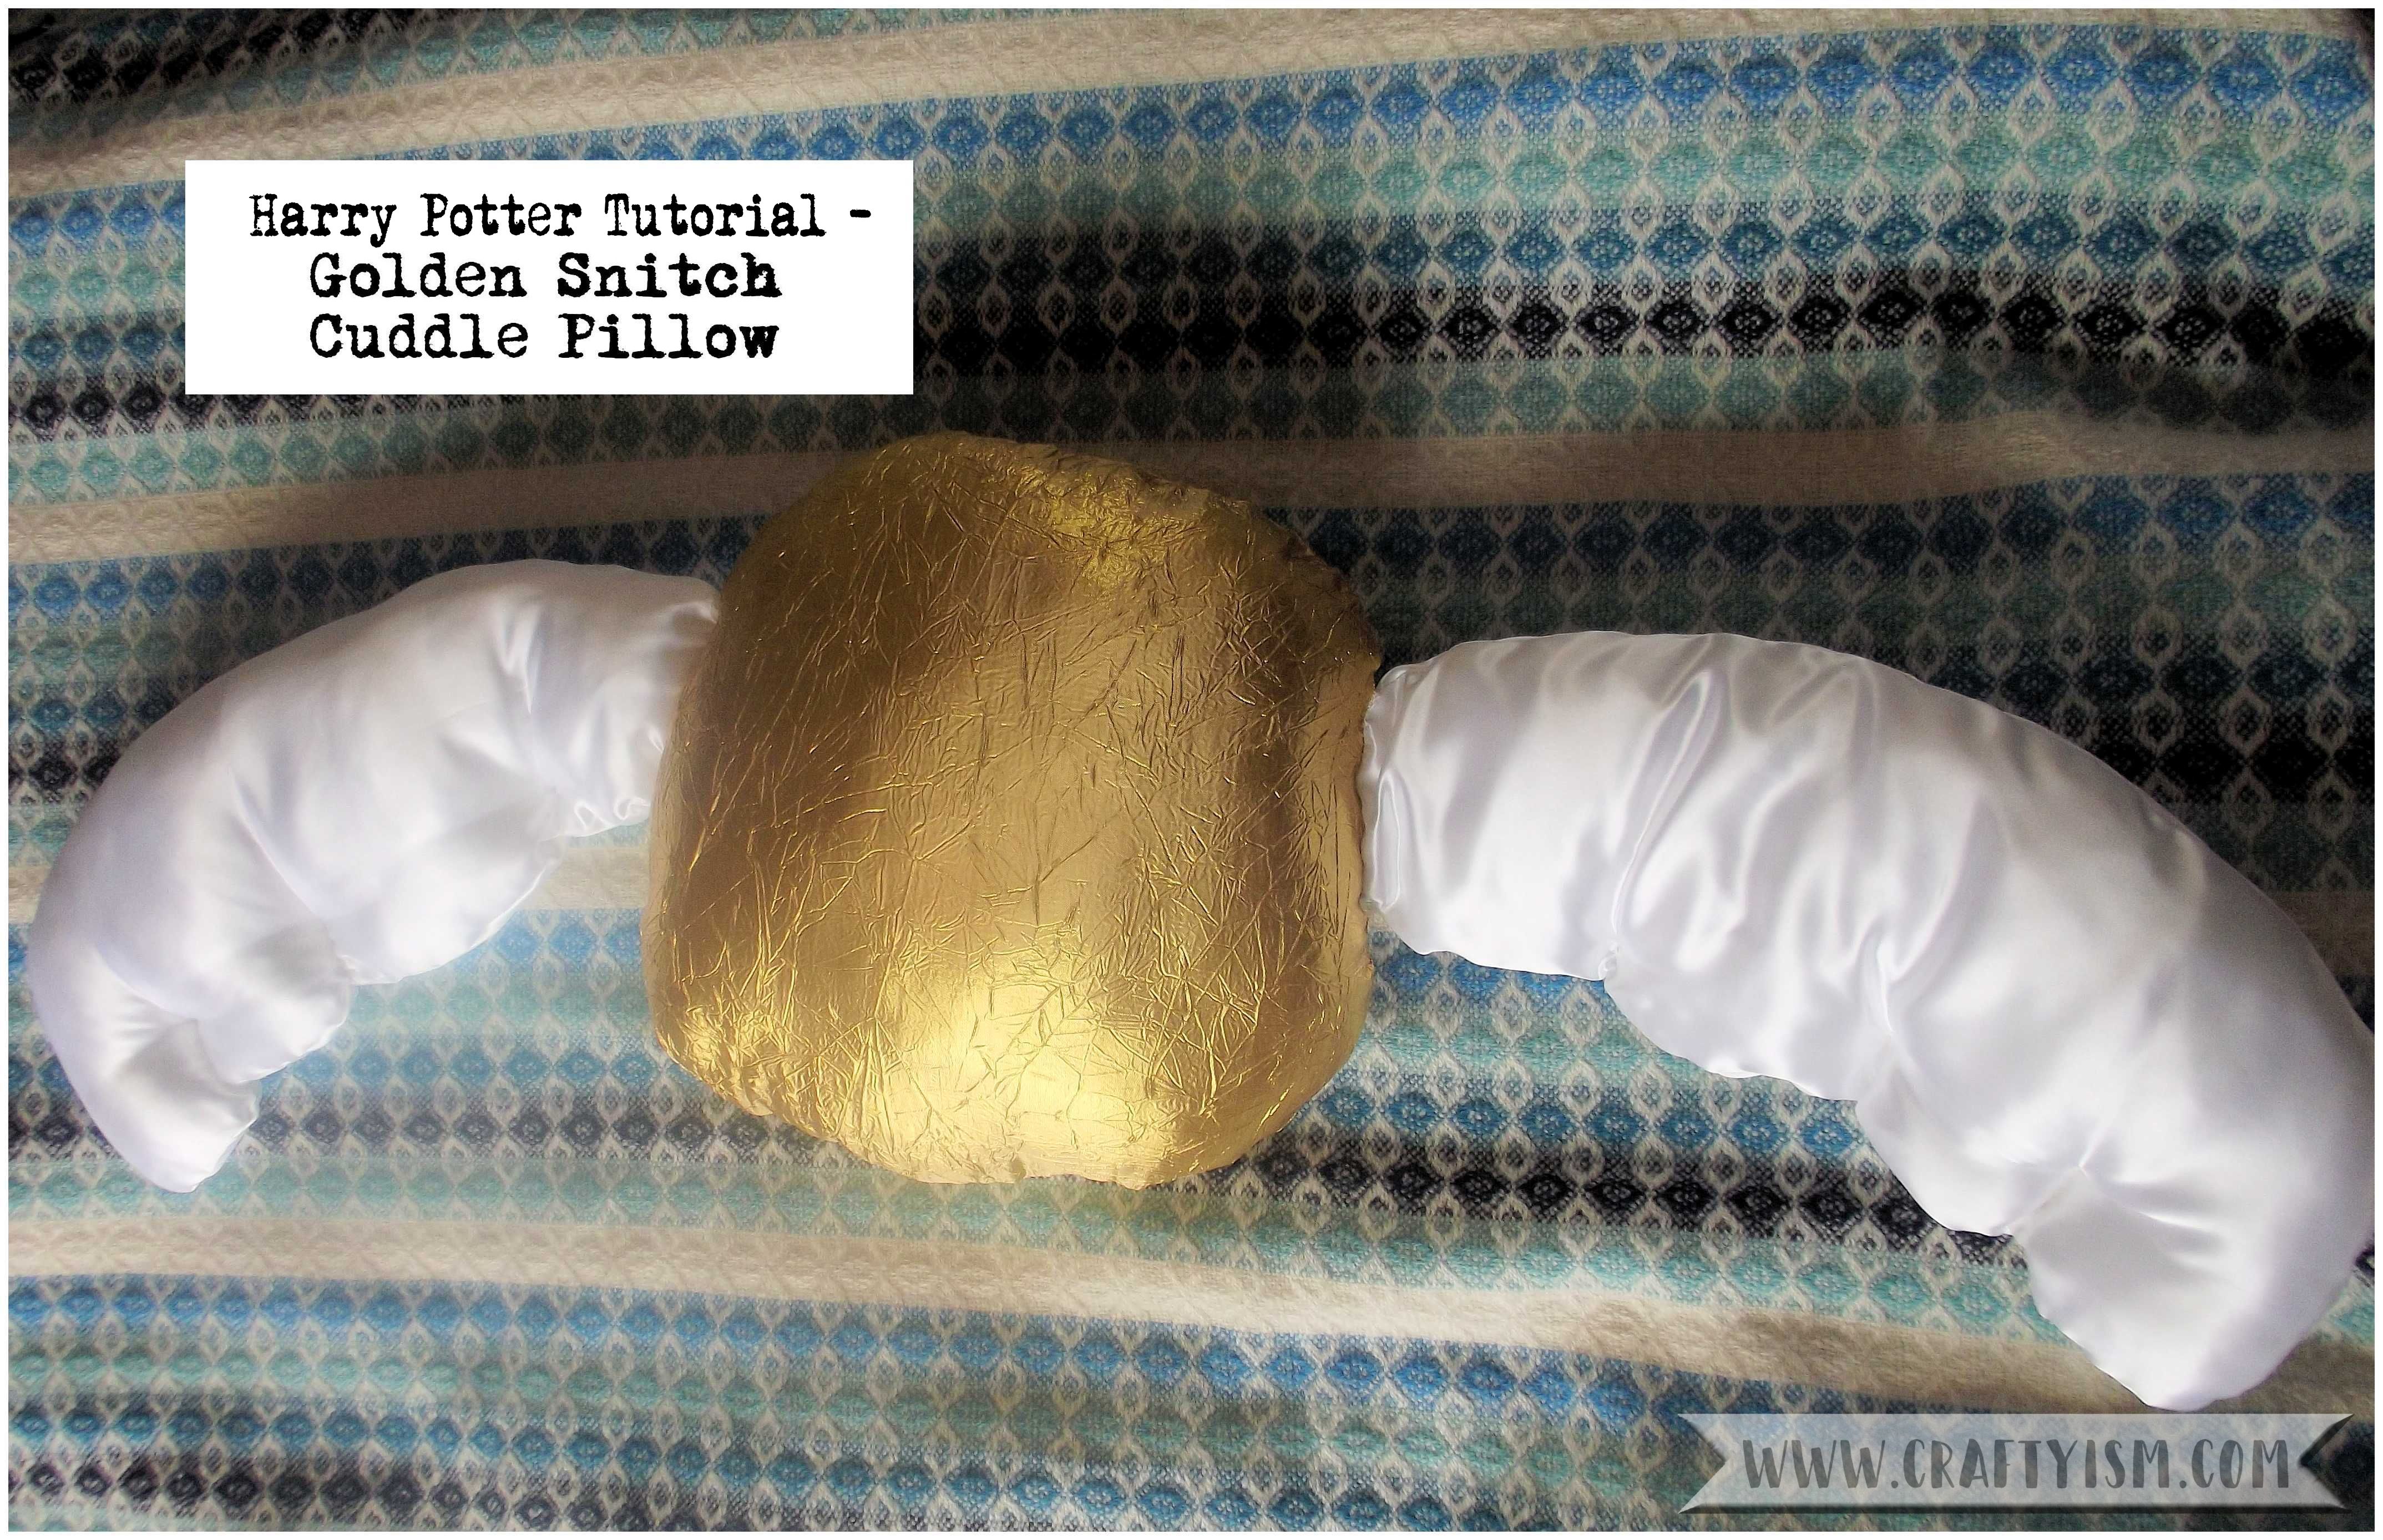 Golden Snitch Cuddle Pillow